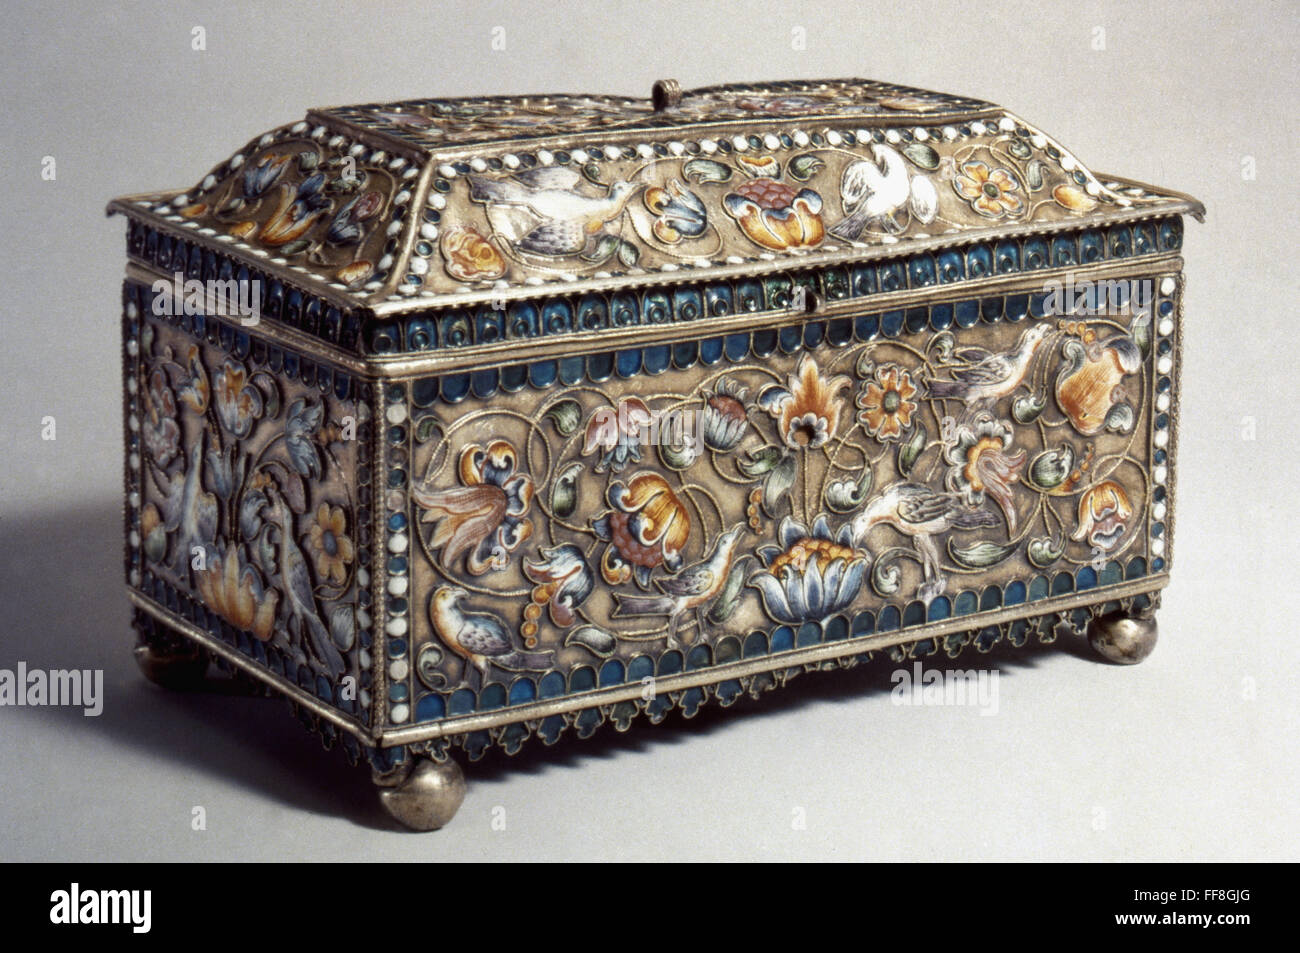 RUSSIAN ENAMEL CASKET. /nSilver and painted. Late 17th century. Stock Photo